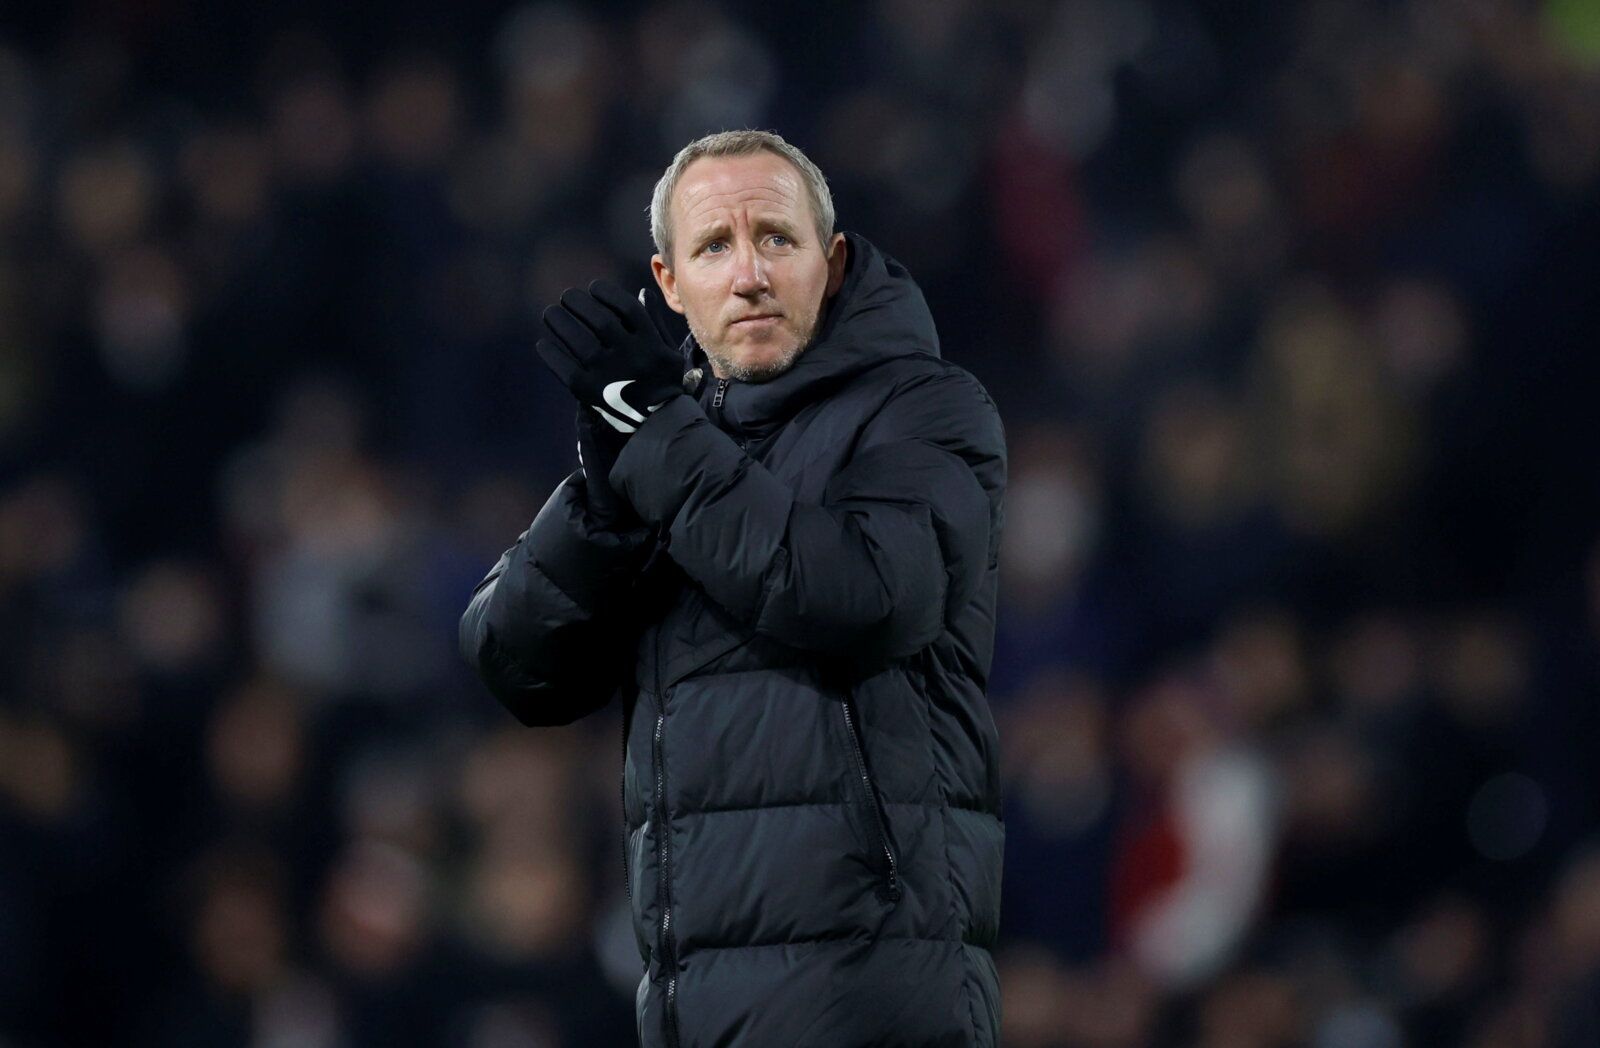 Soccer Football - Championship - Fulham v Birmingham City - Craven Cottage, London, Britain - January 18, 2022 Birmingham City manager Lee Bowyer  Peter Cziborra/Action Images  EDITORIAL USE ONLY. No use with unauthorized audio, video, data, fixture lists, club/league logos or 